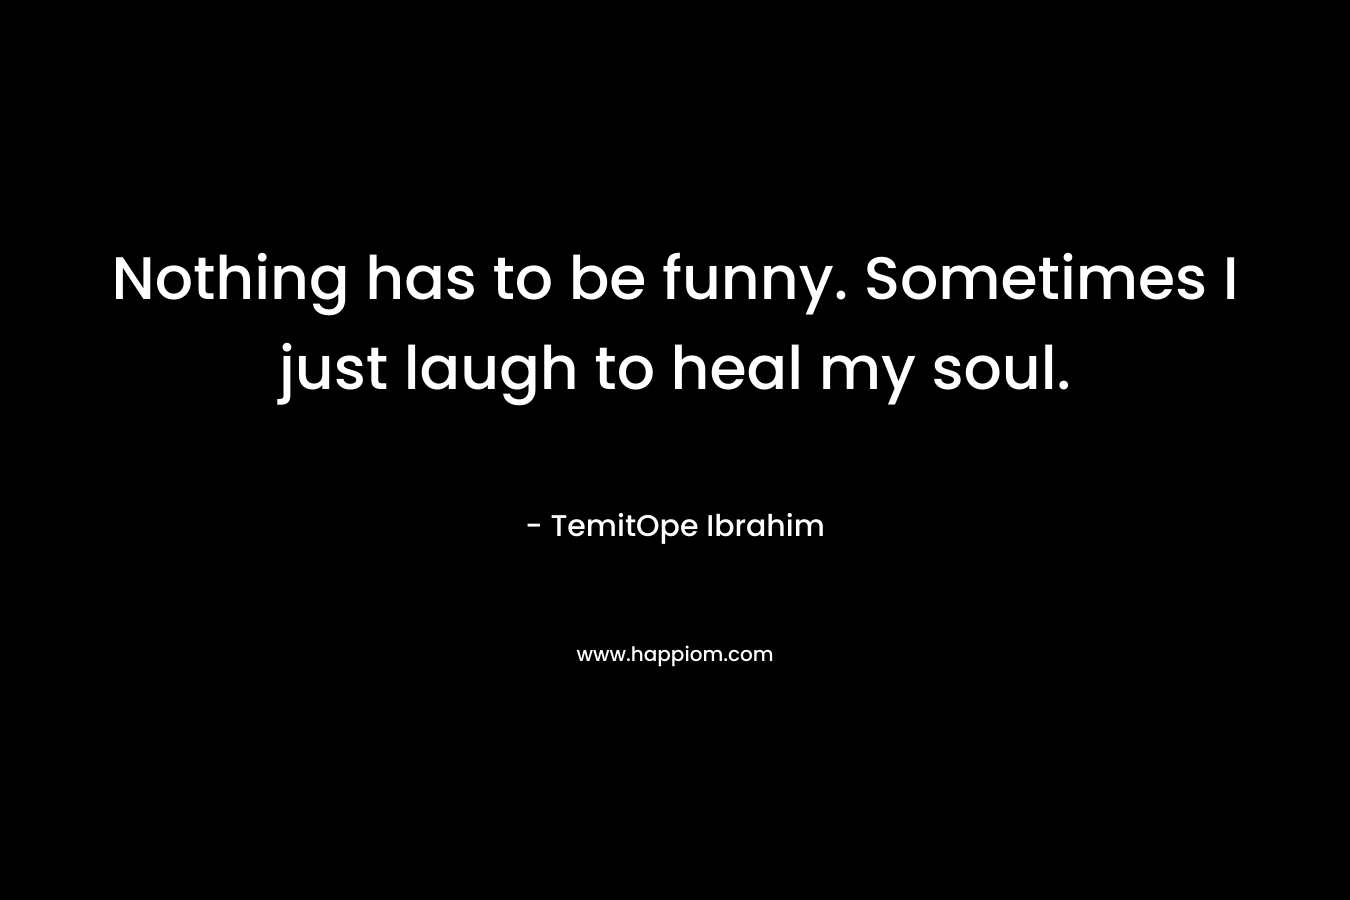 Nothing has to be funny. Sometimes I just laugh to heal my soul.